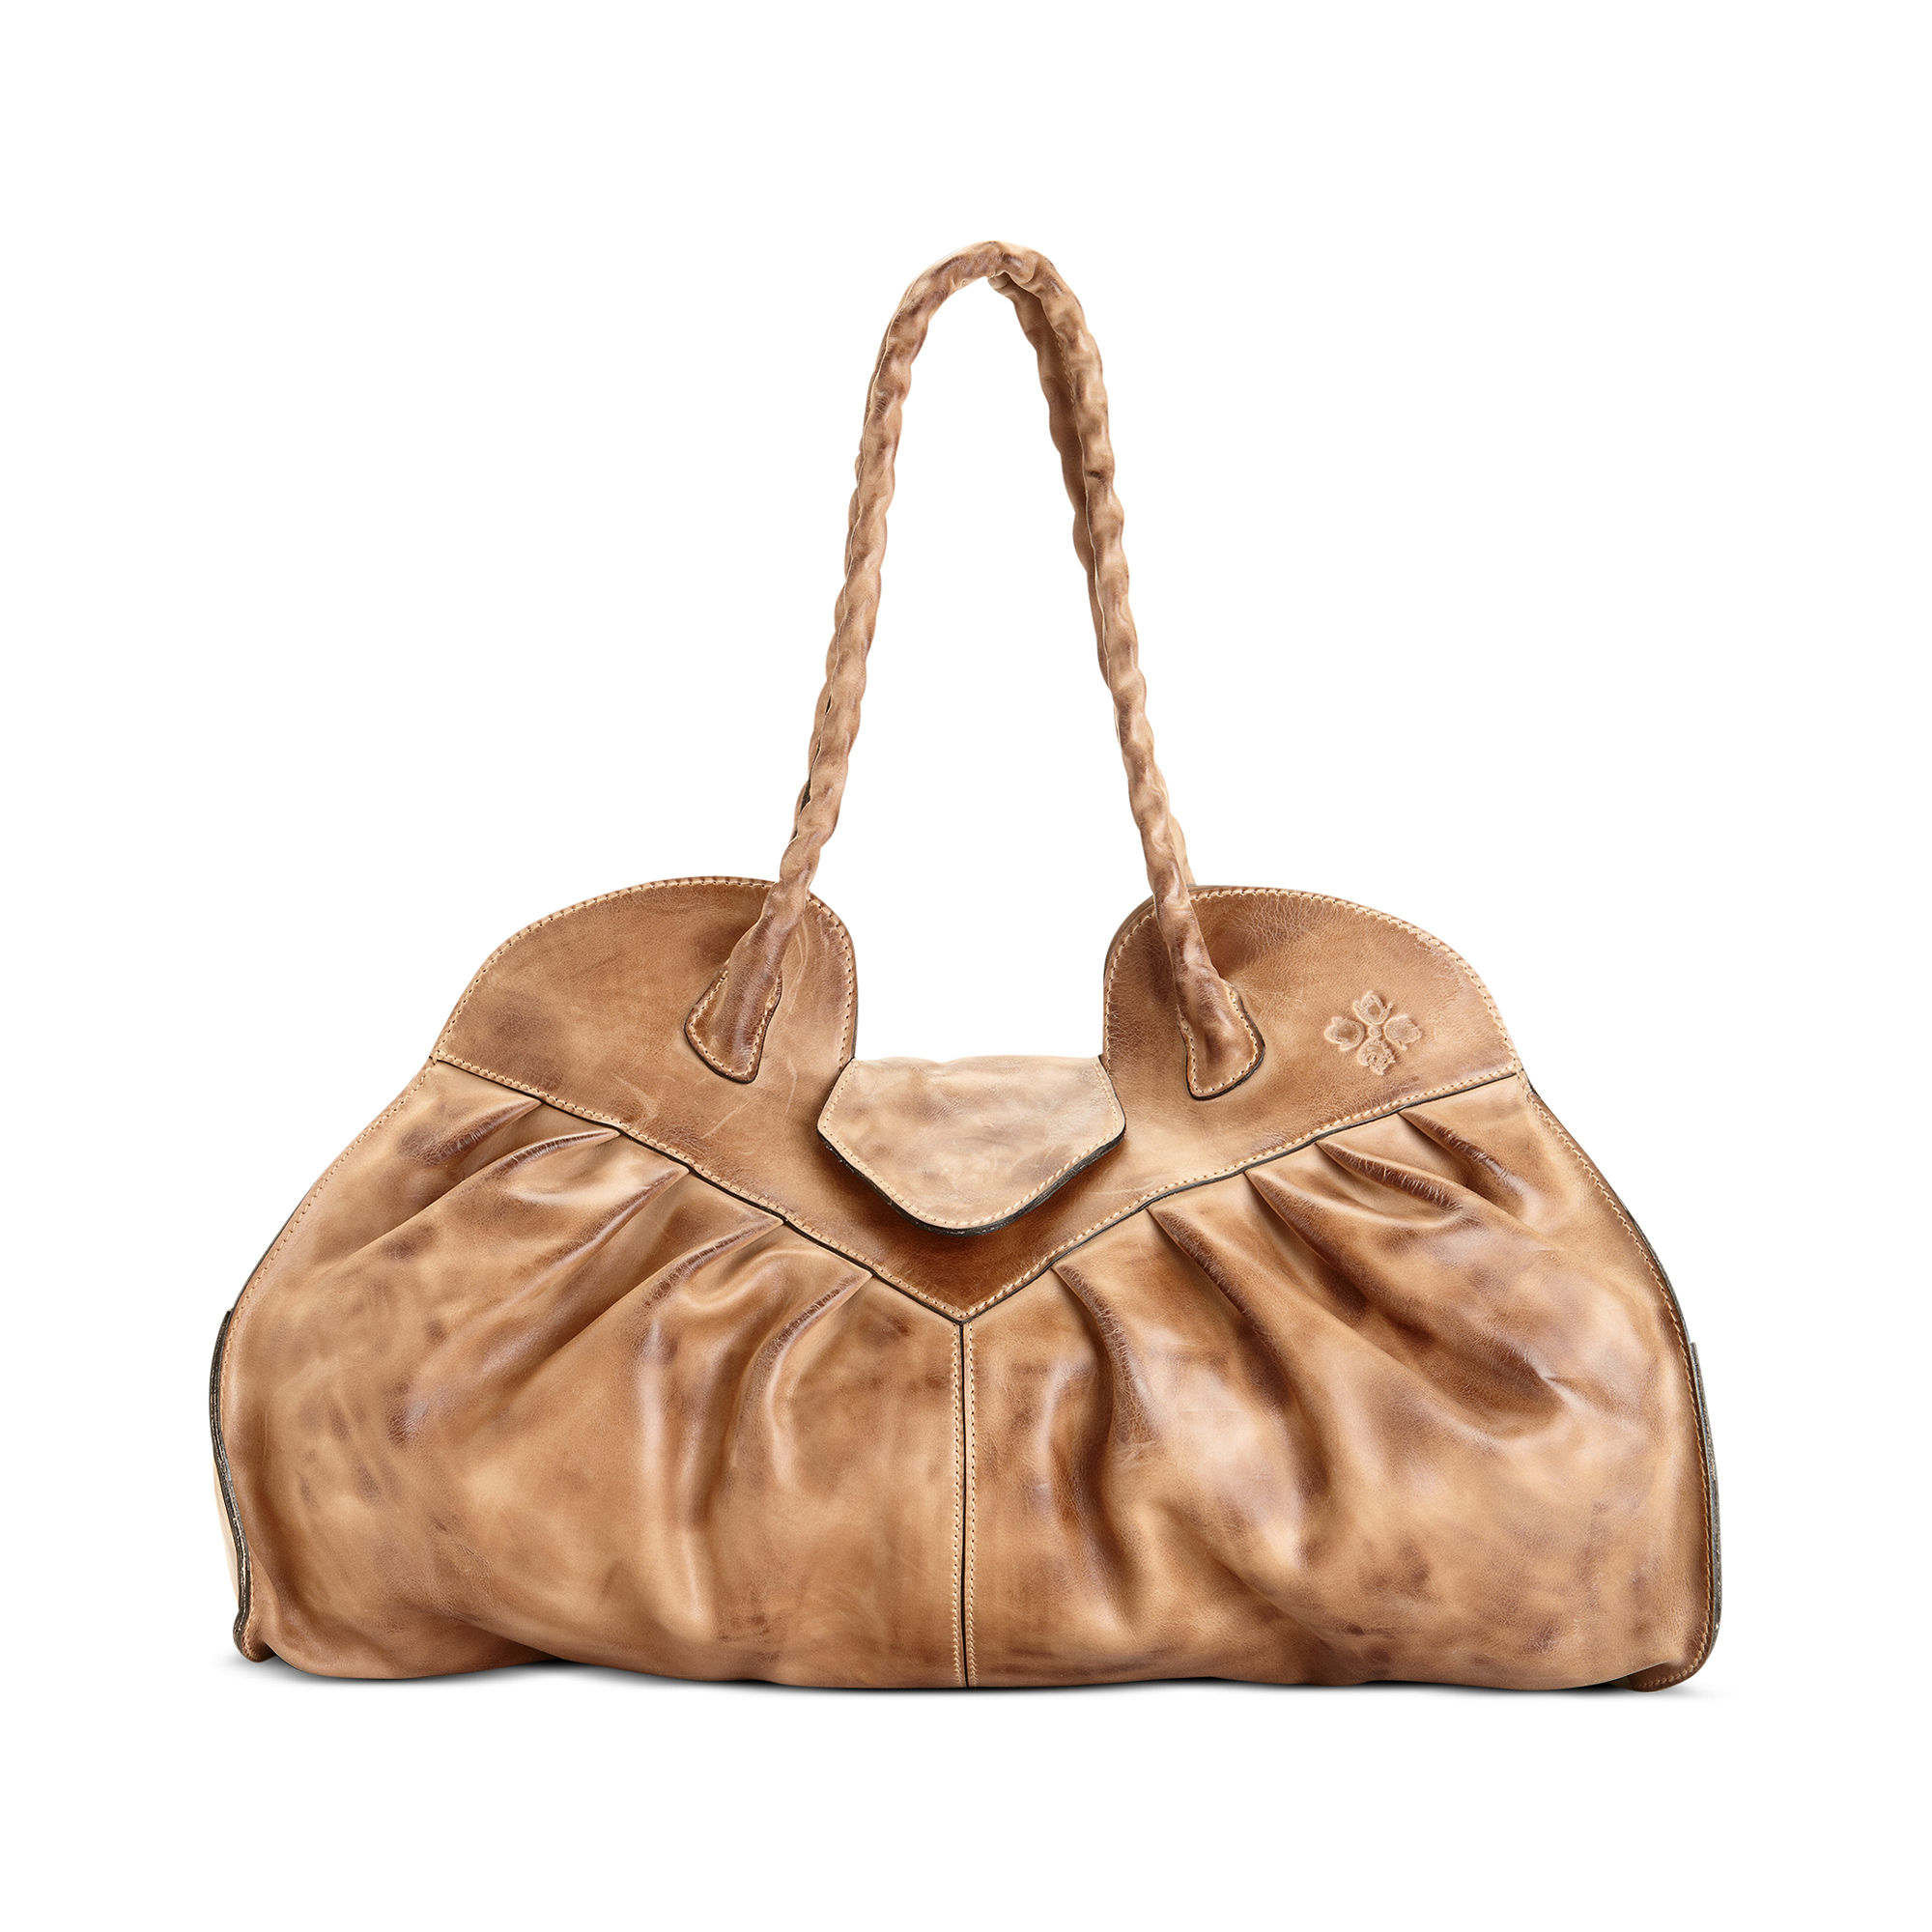 Lyst - Patricia Nash Lione Large Satchel in Brown